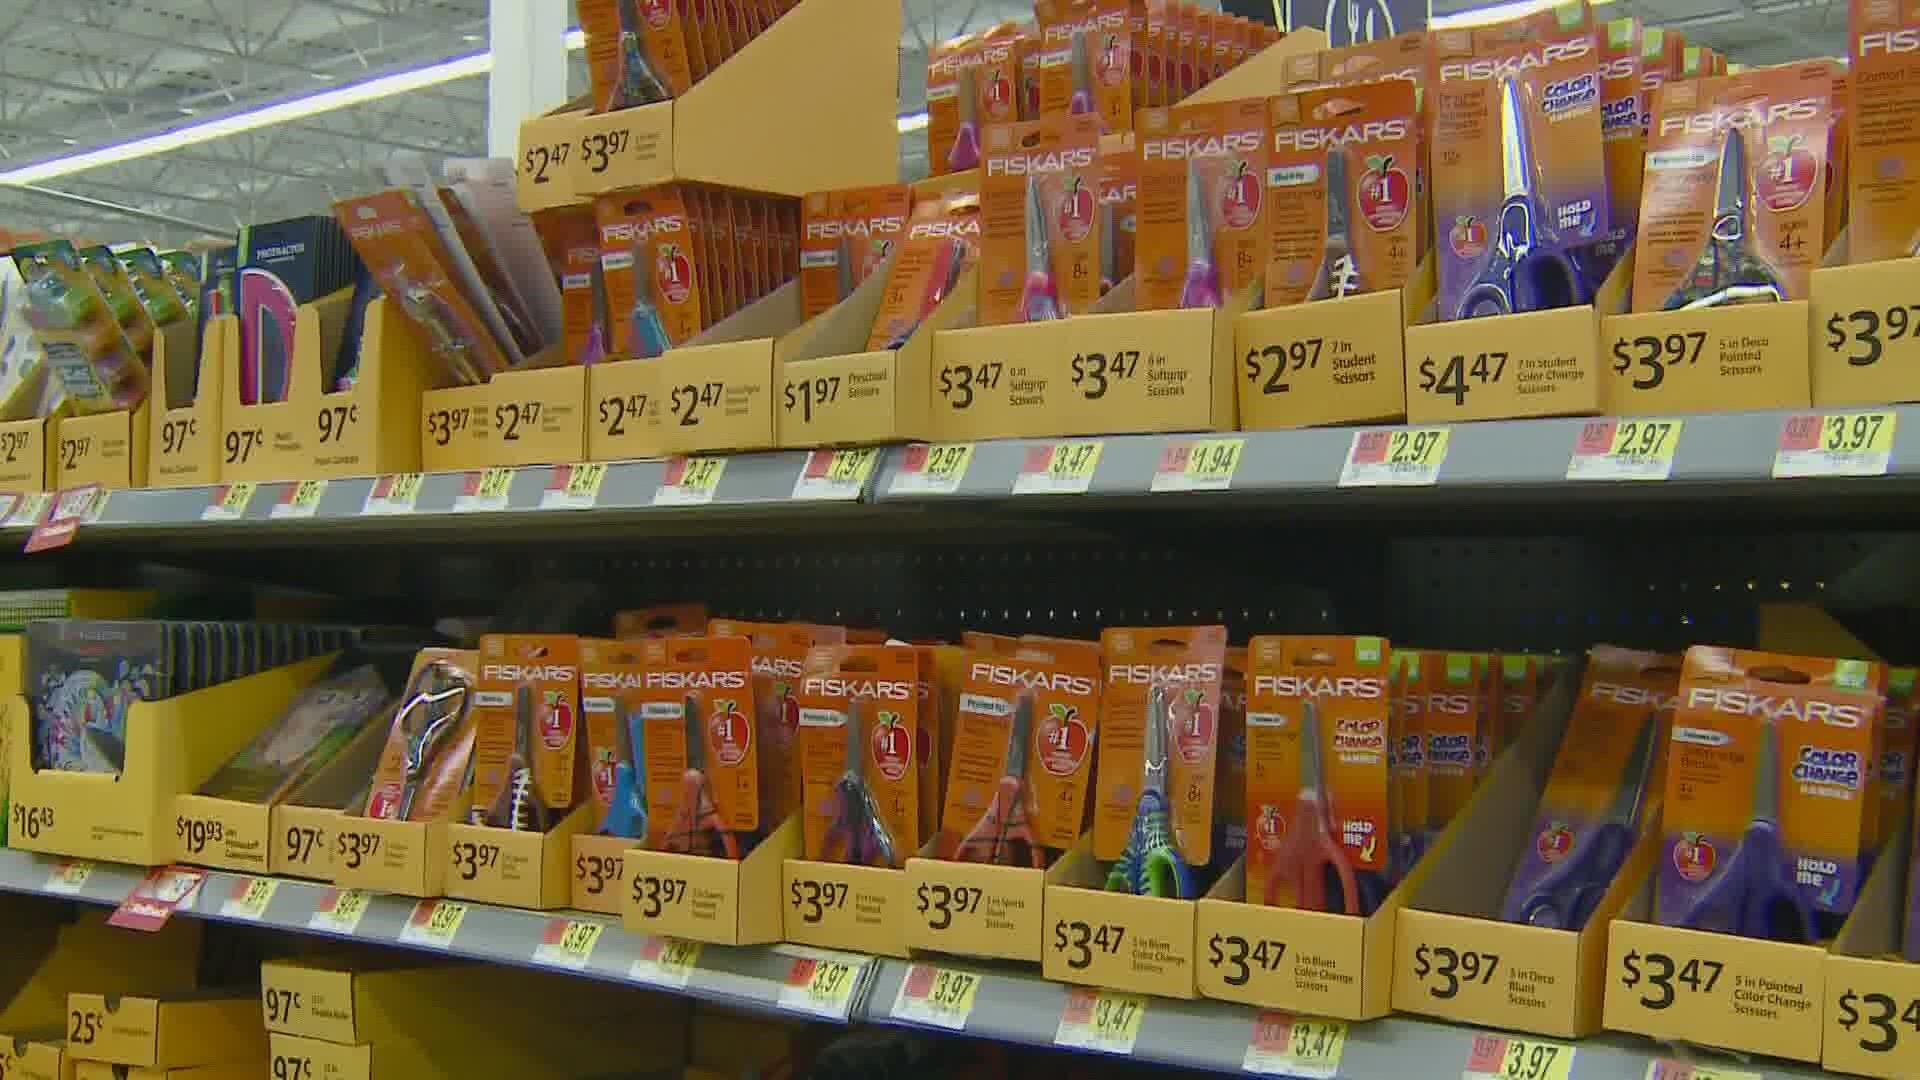 The National Retail Federation says inflation is expected to add a 40% increase on the cost of school supplies this year.